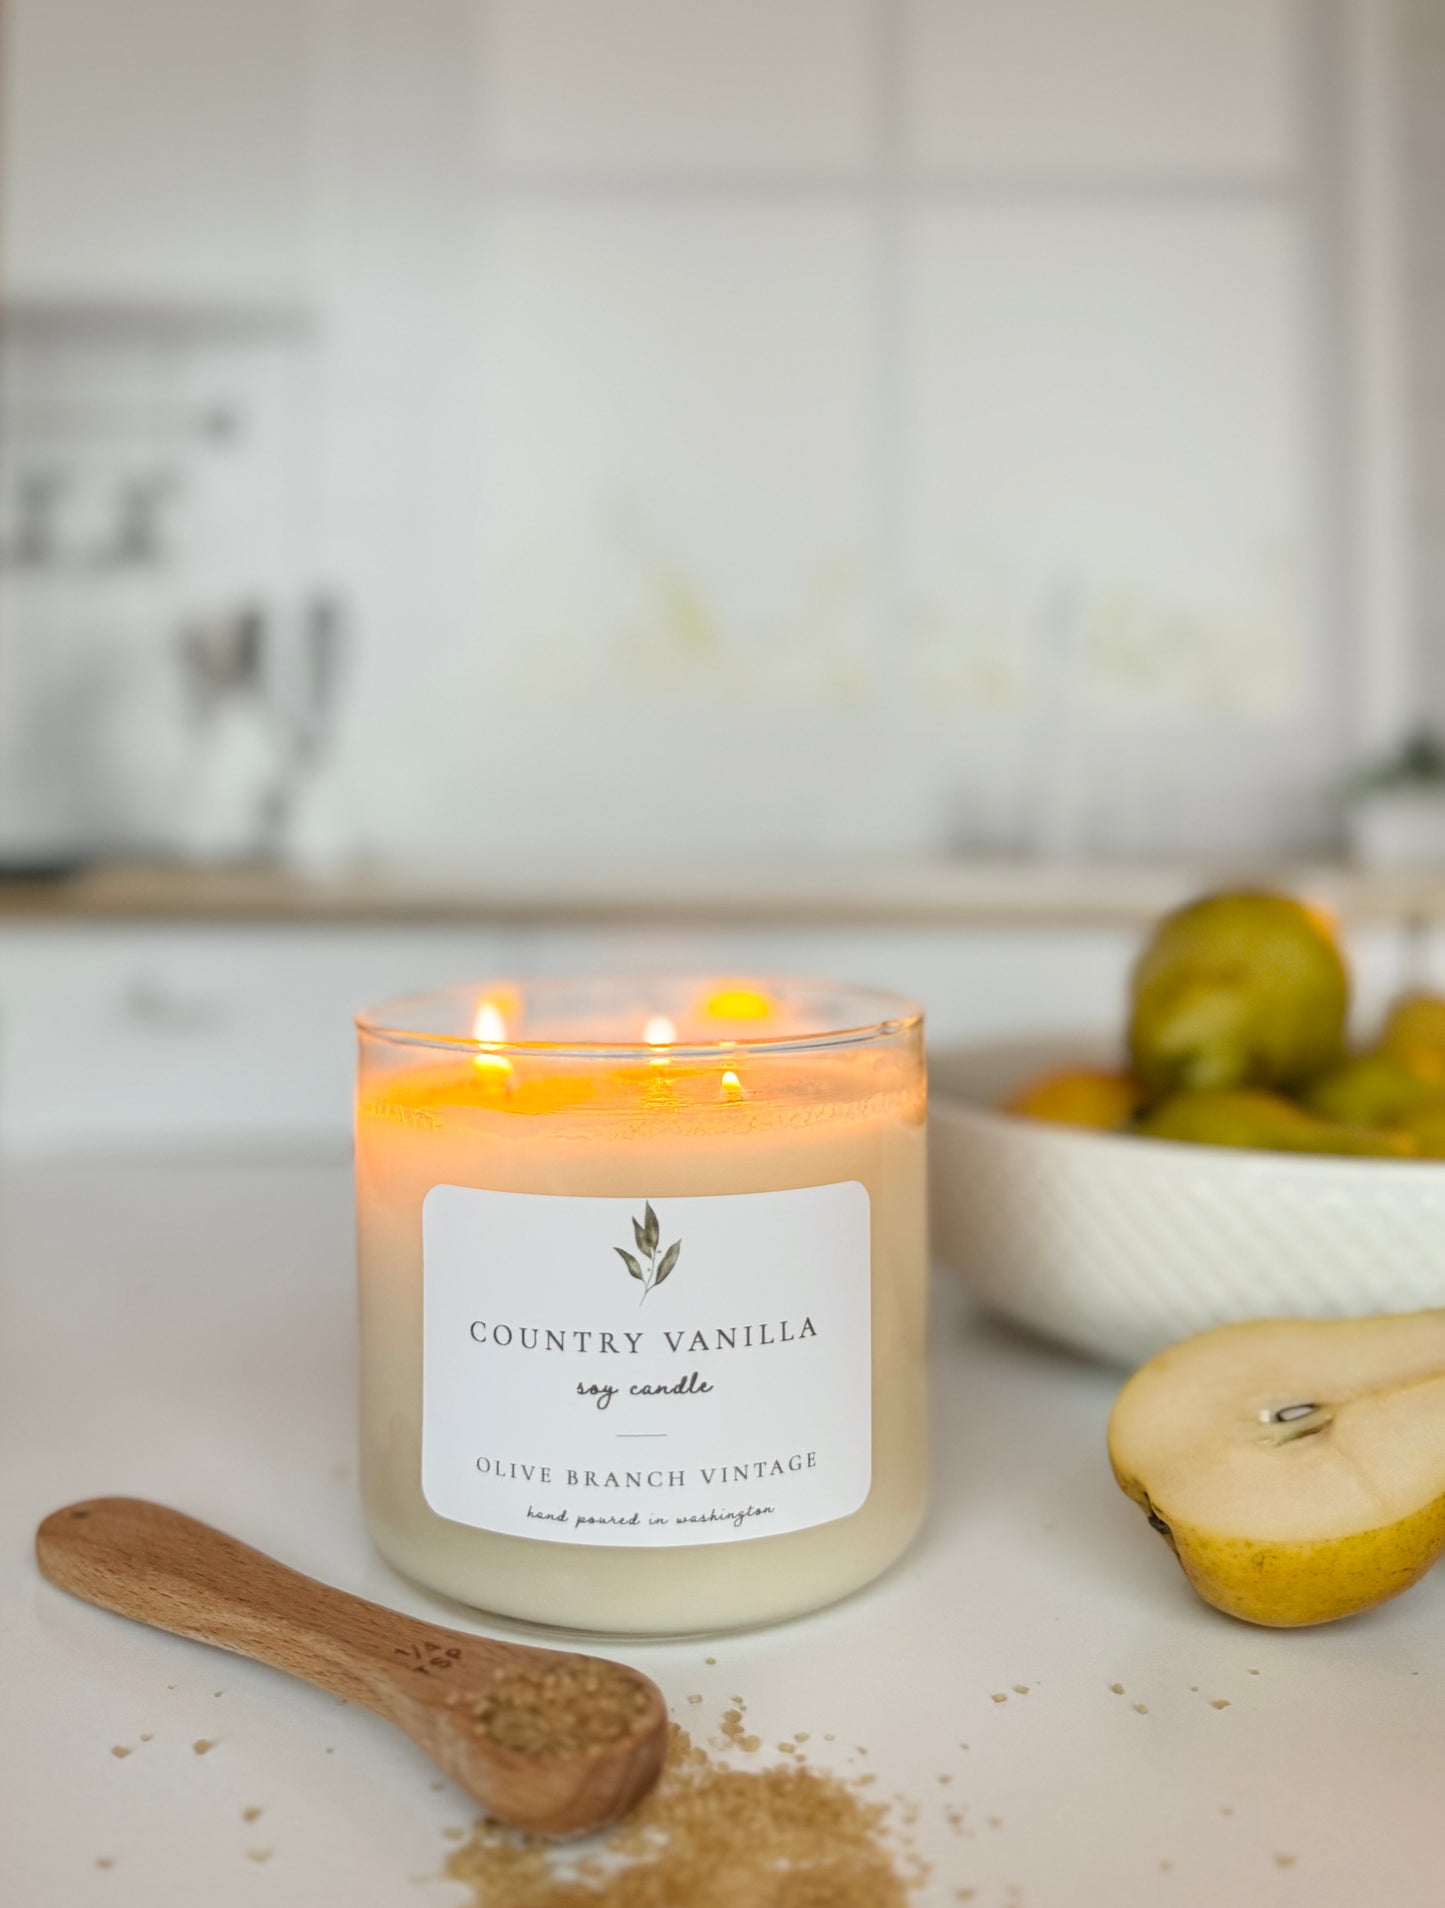 Country Vanilla 3-wick candle